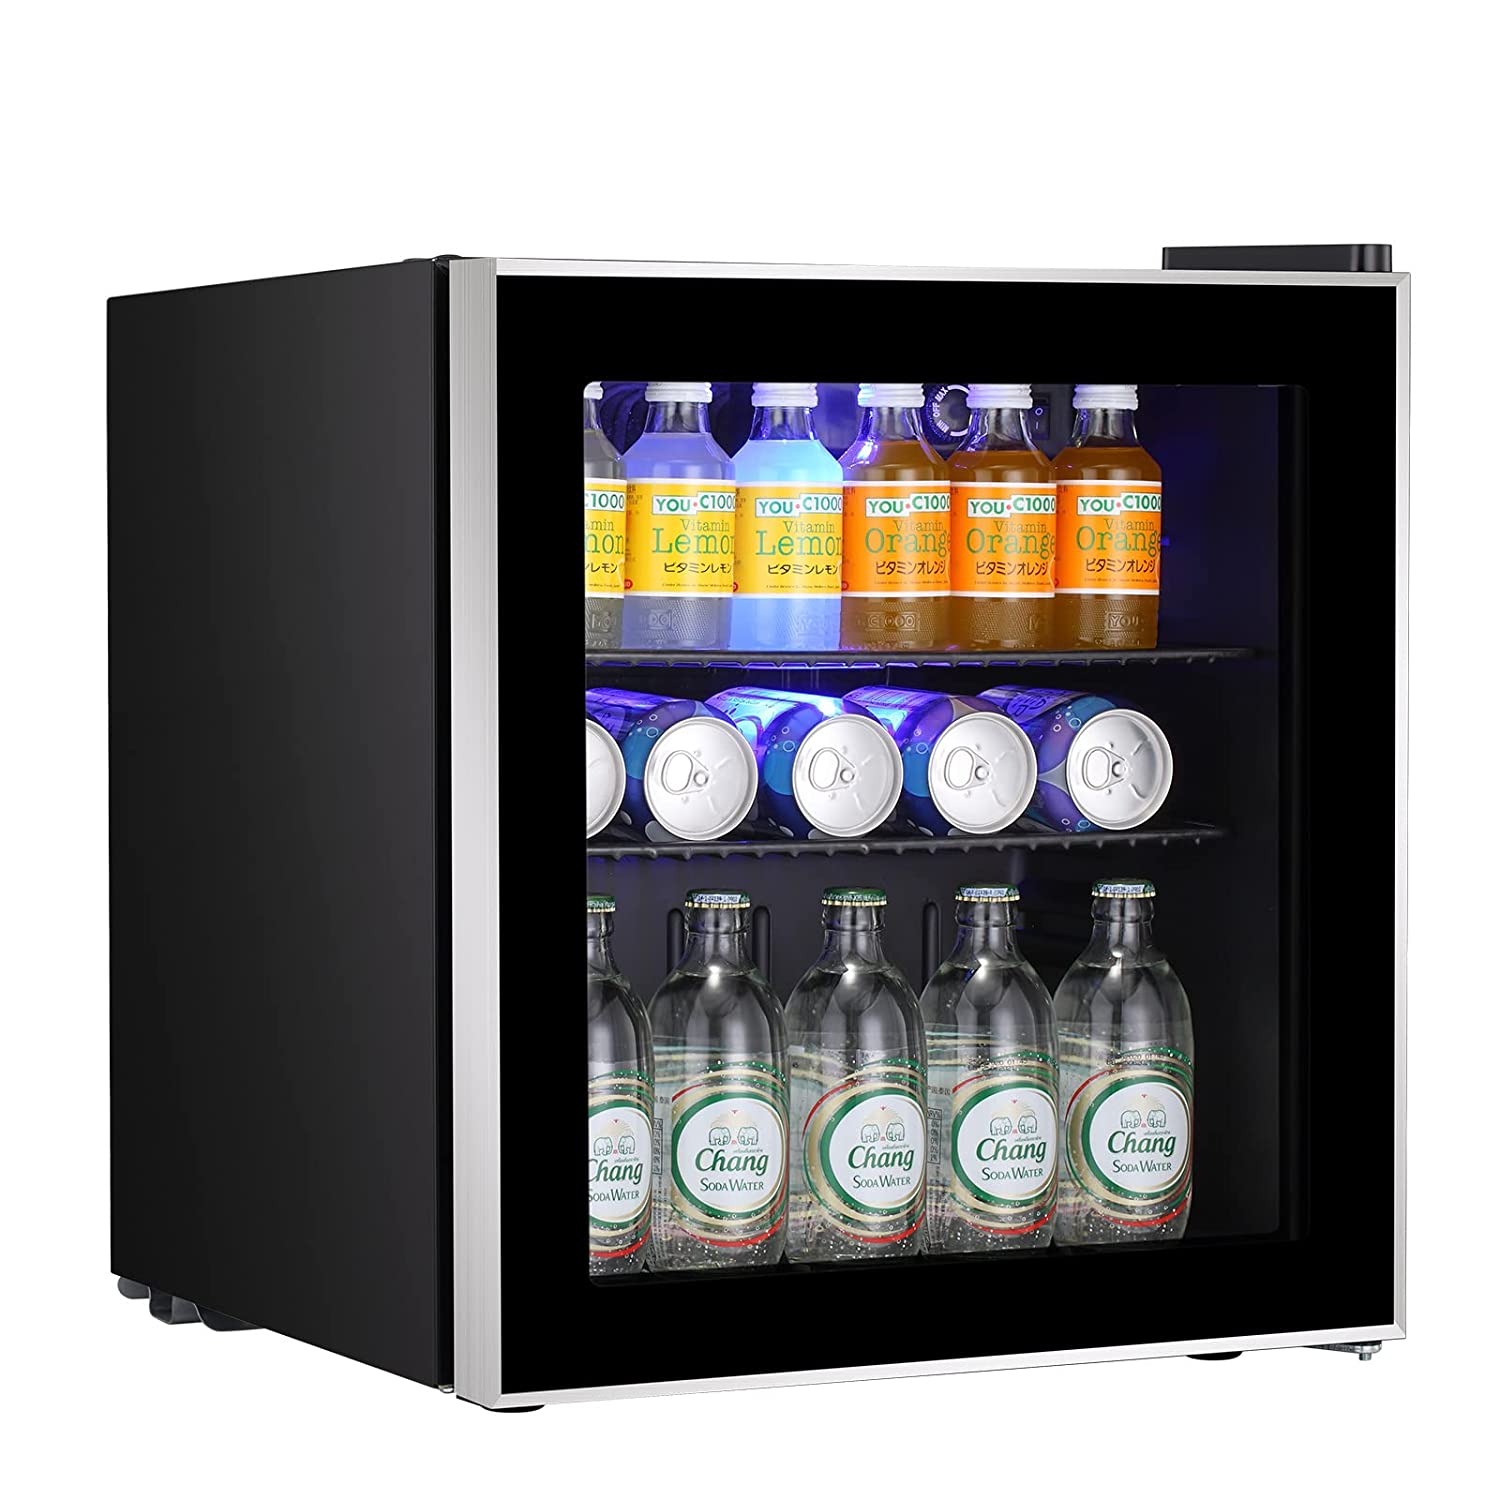 Mini Fridge Glass Door: The Convenience and Style of a Mini Fridge with a Clear View